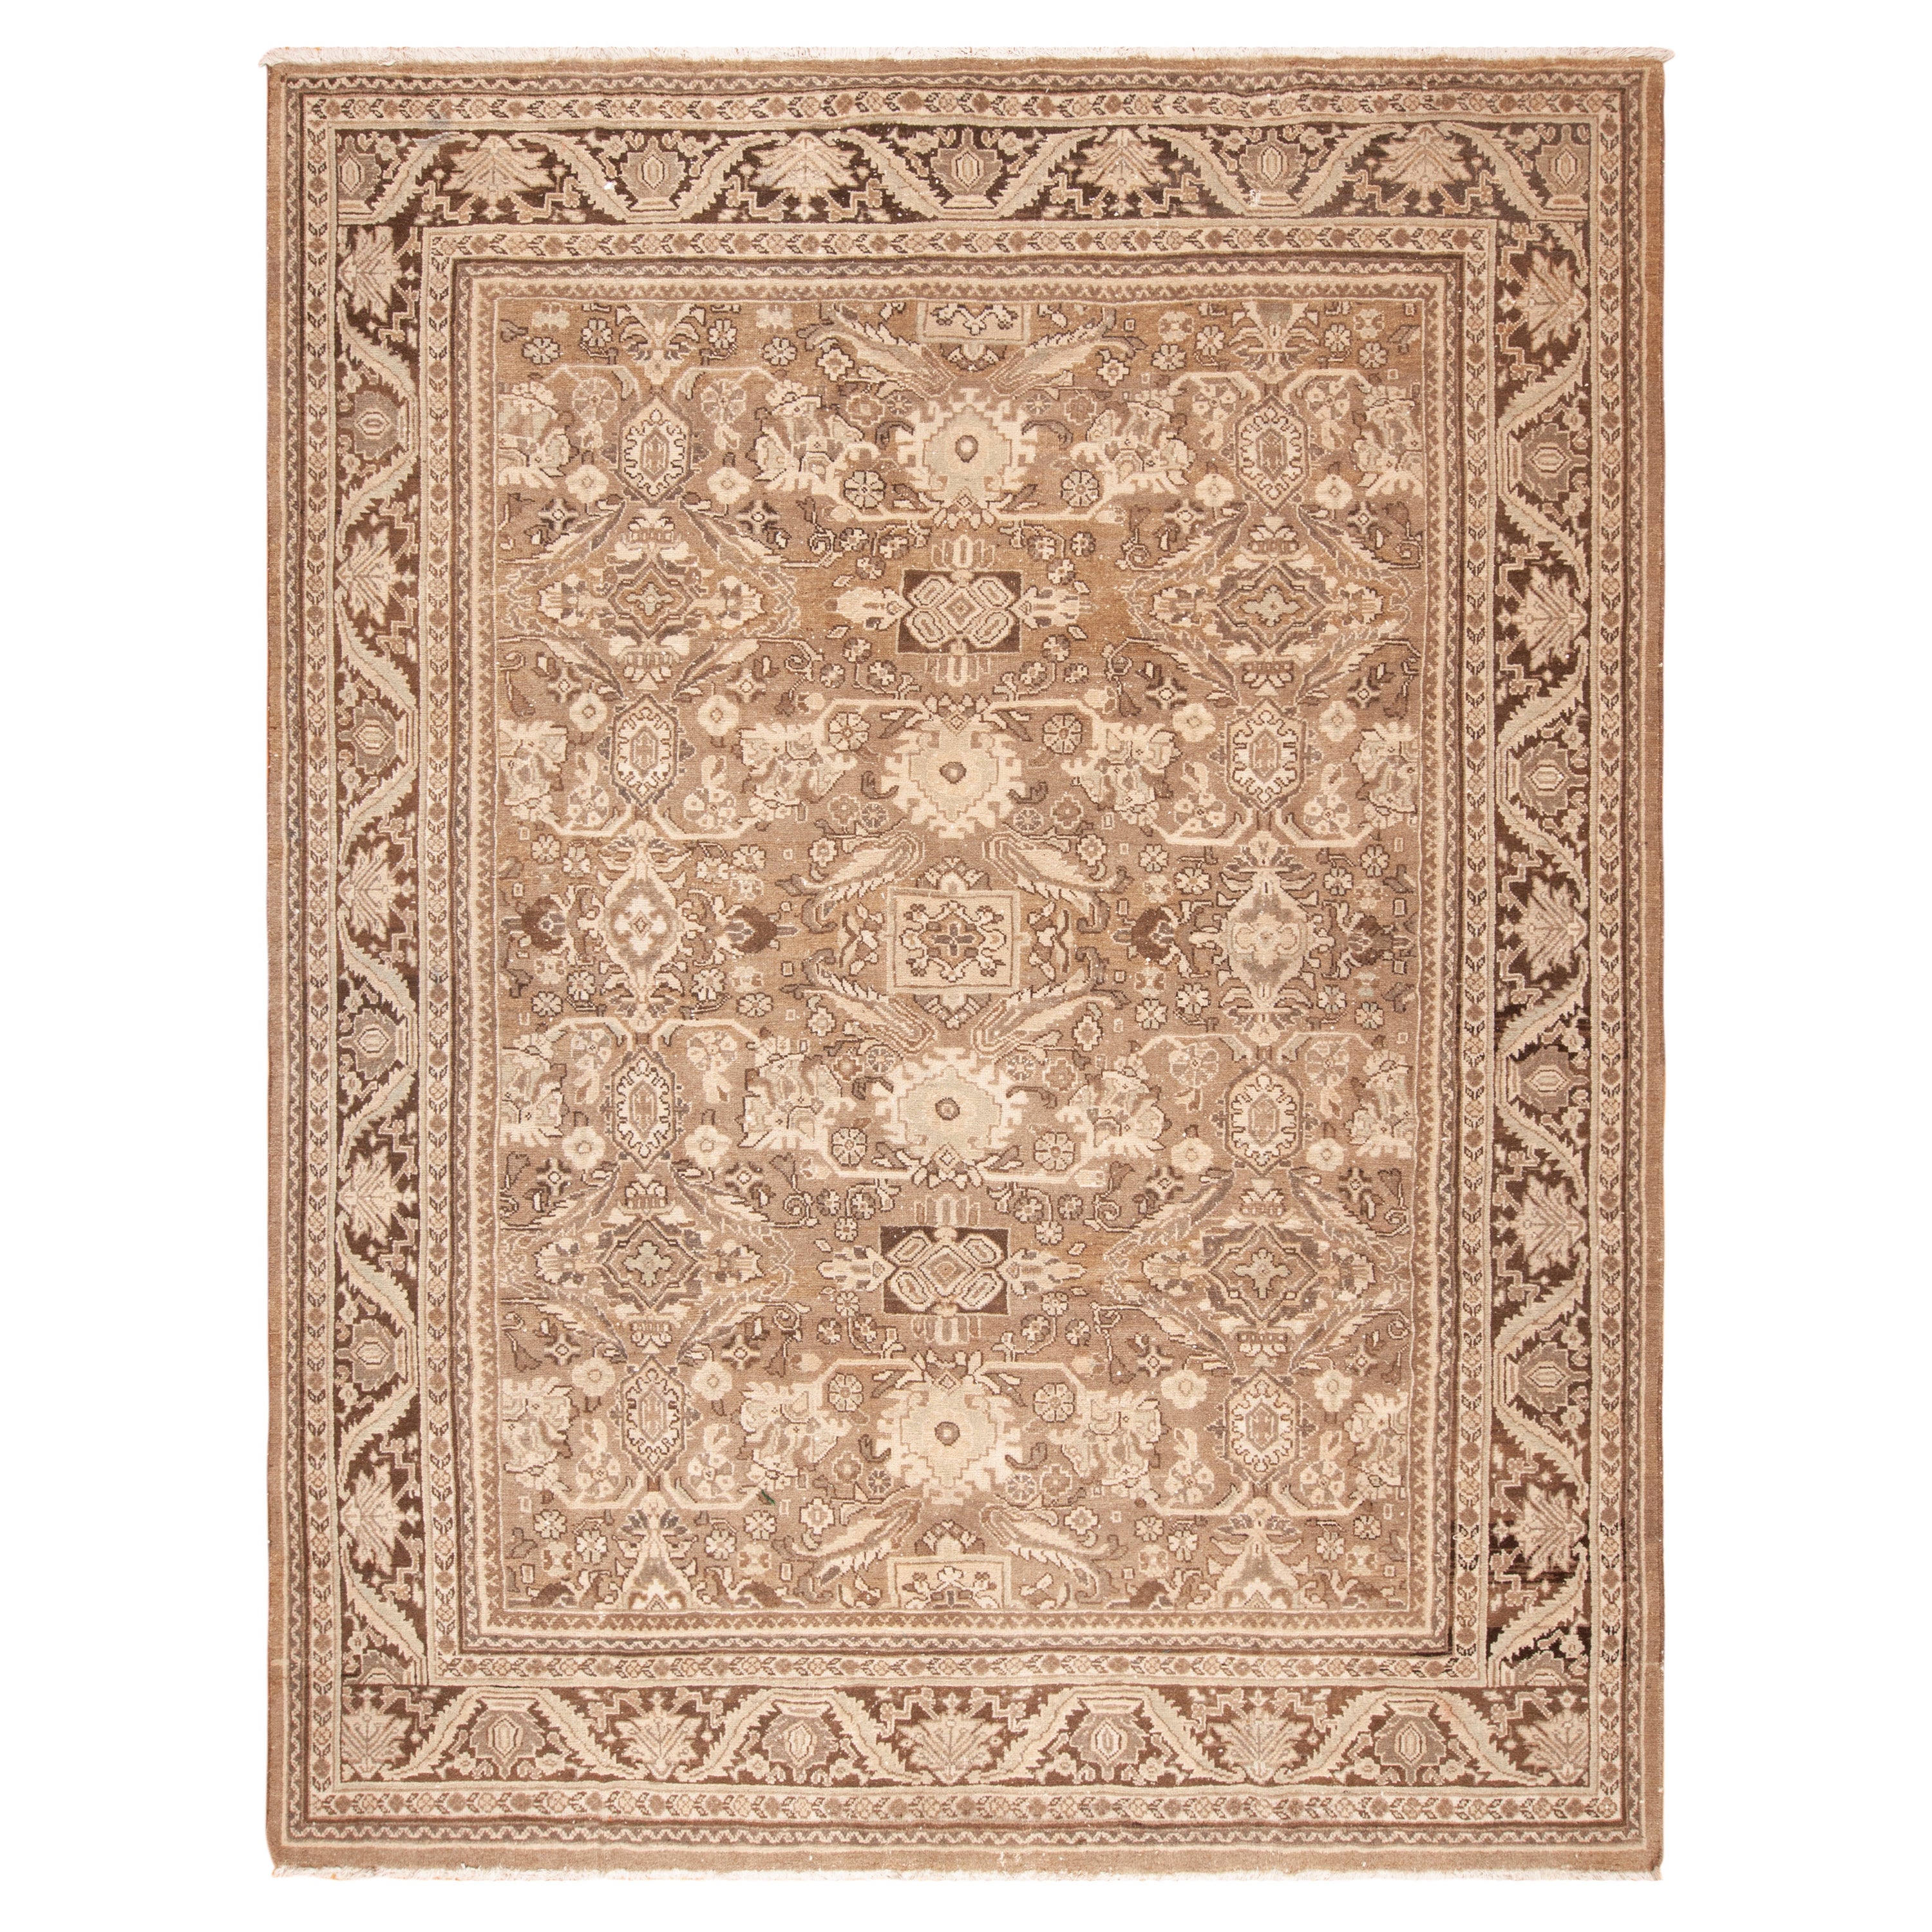 Magnificent Antique Geometric Persian Sultanabad Rug 10'6" x 13'3" For Sale